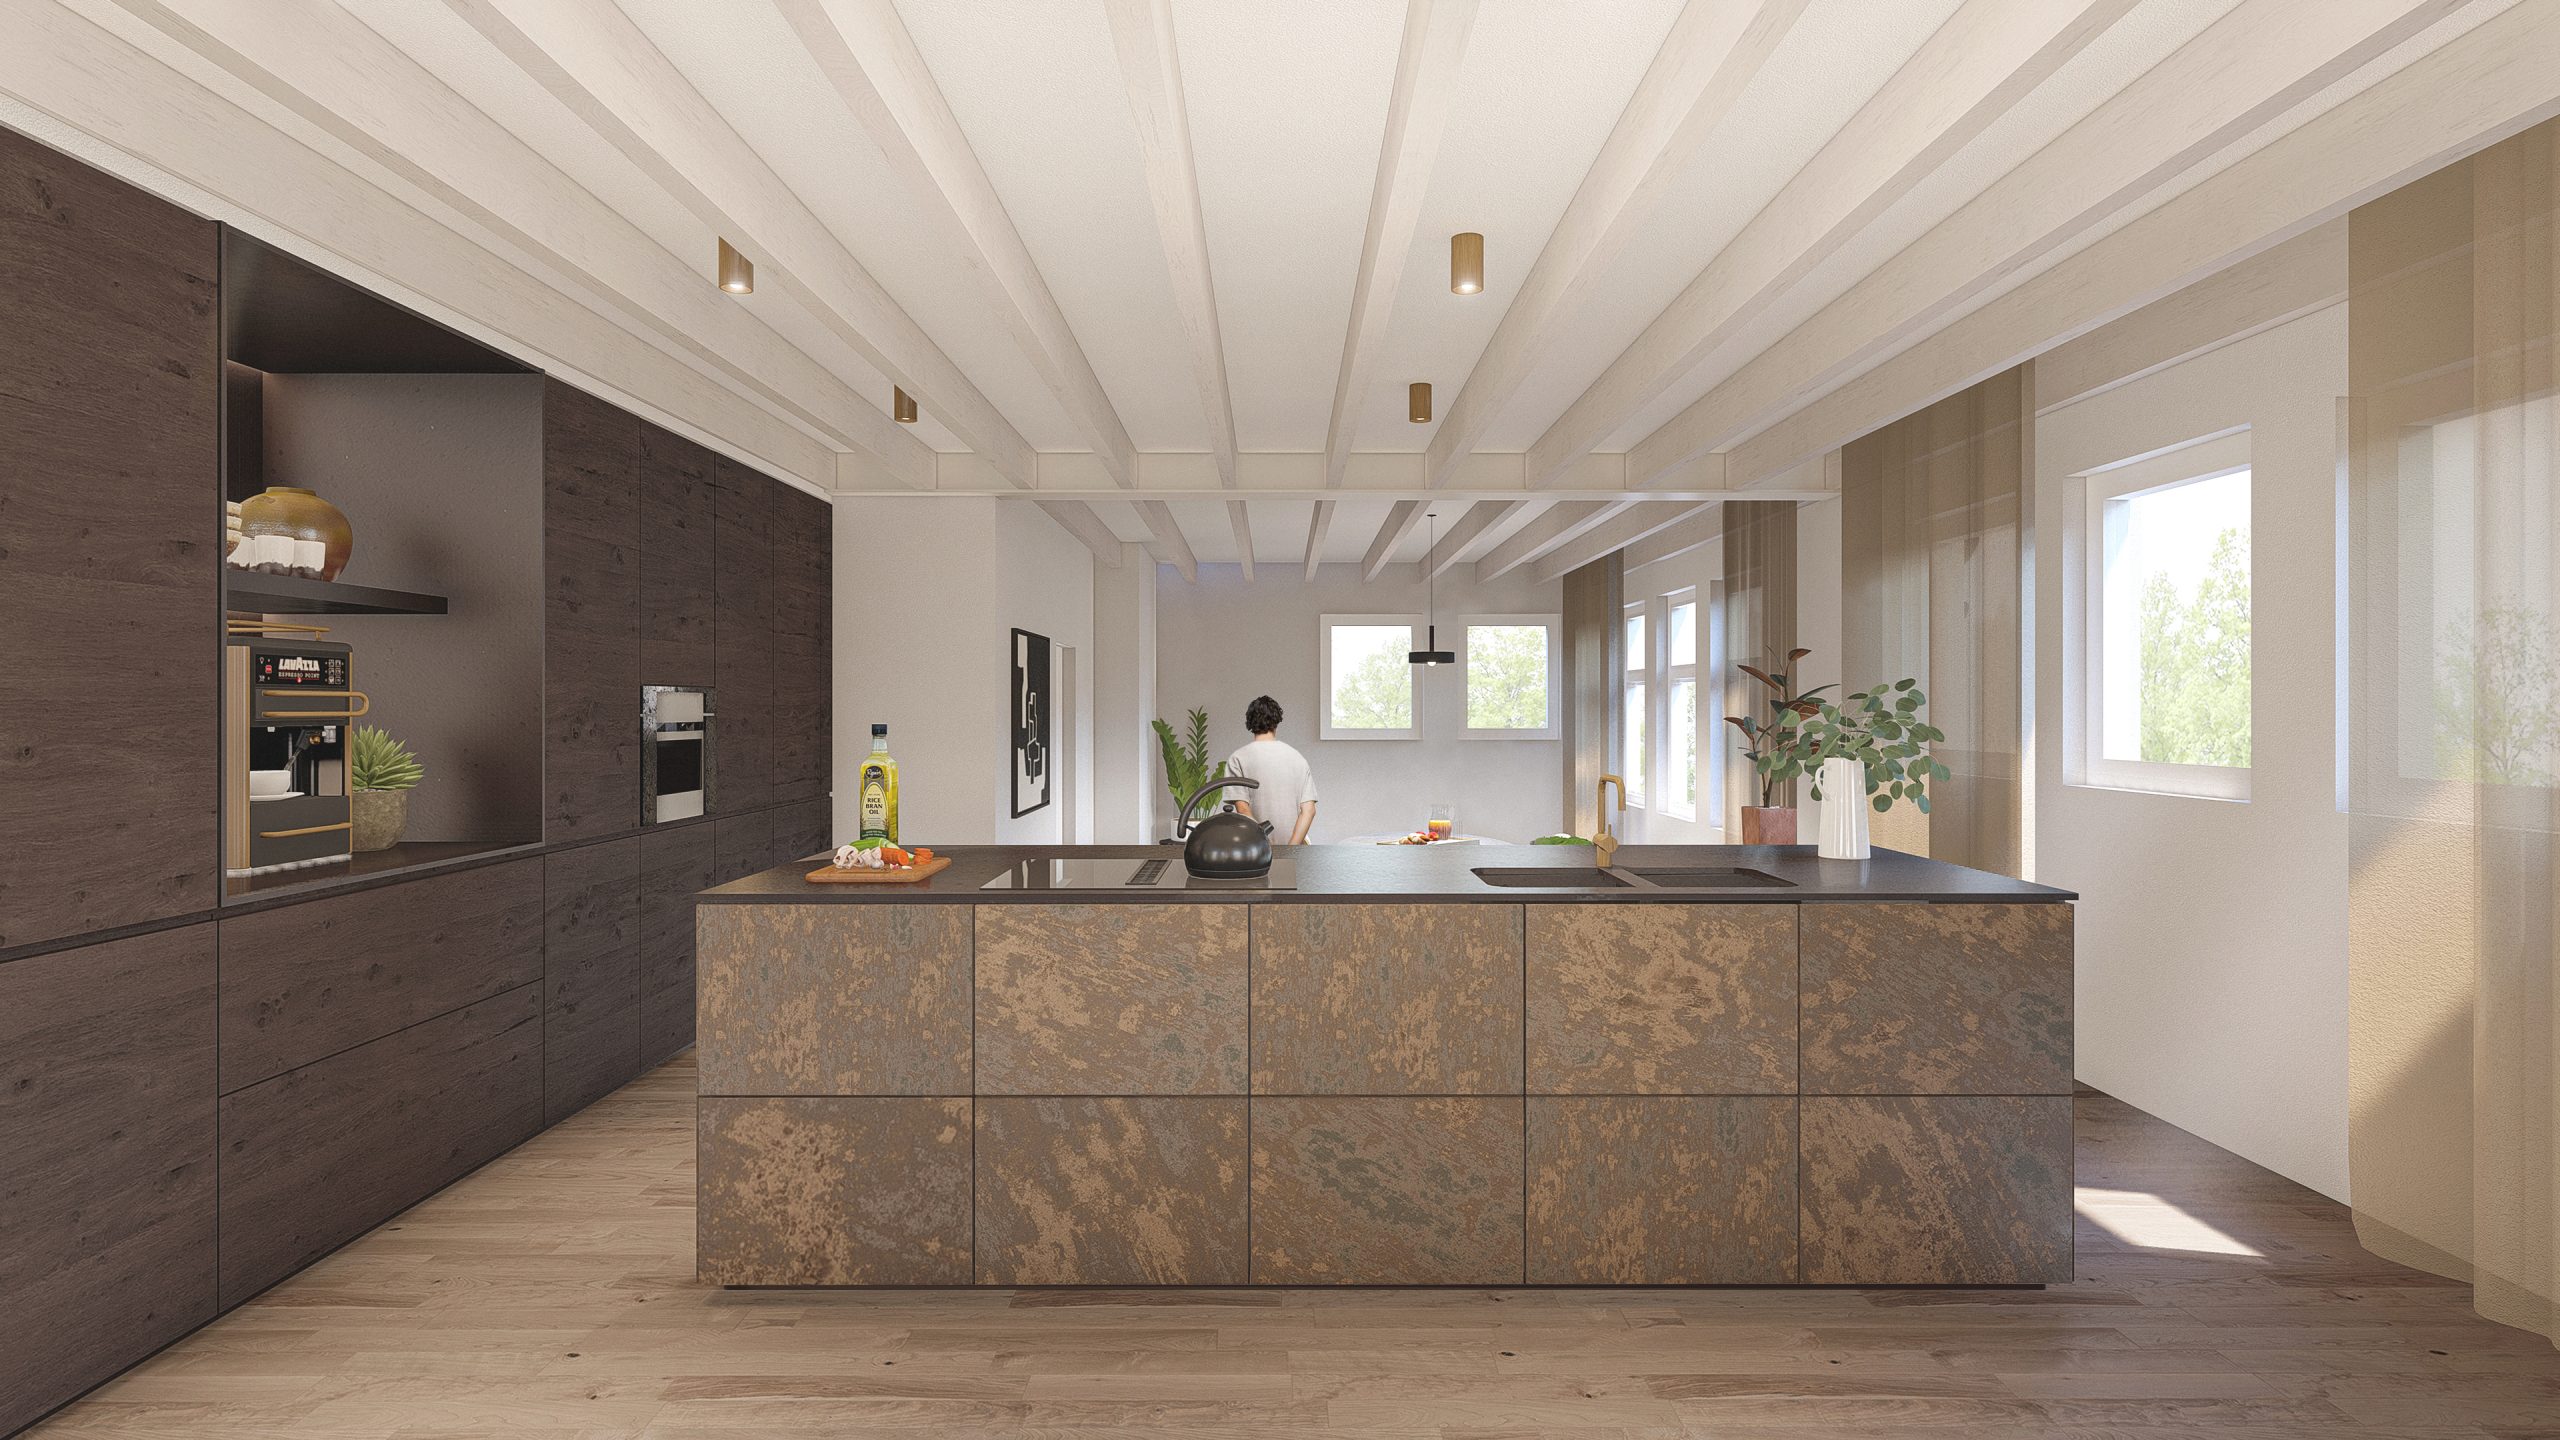 Bespoke design kitchen with textured brass fronts on isle and dark wooden cabinets contemporary serene high quality